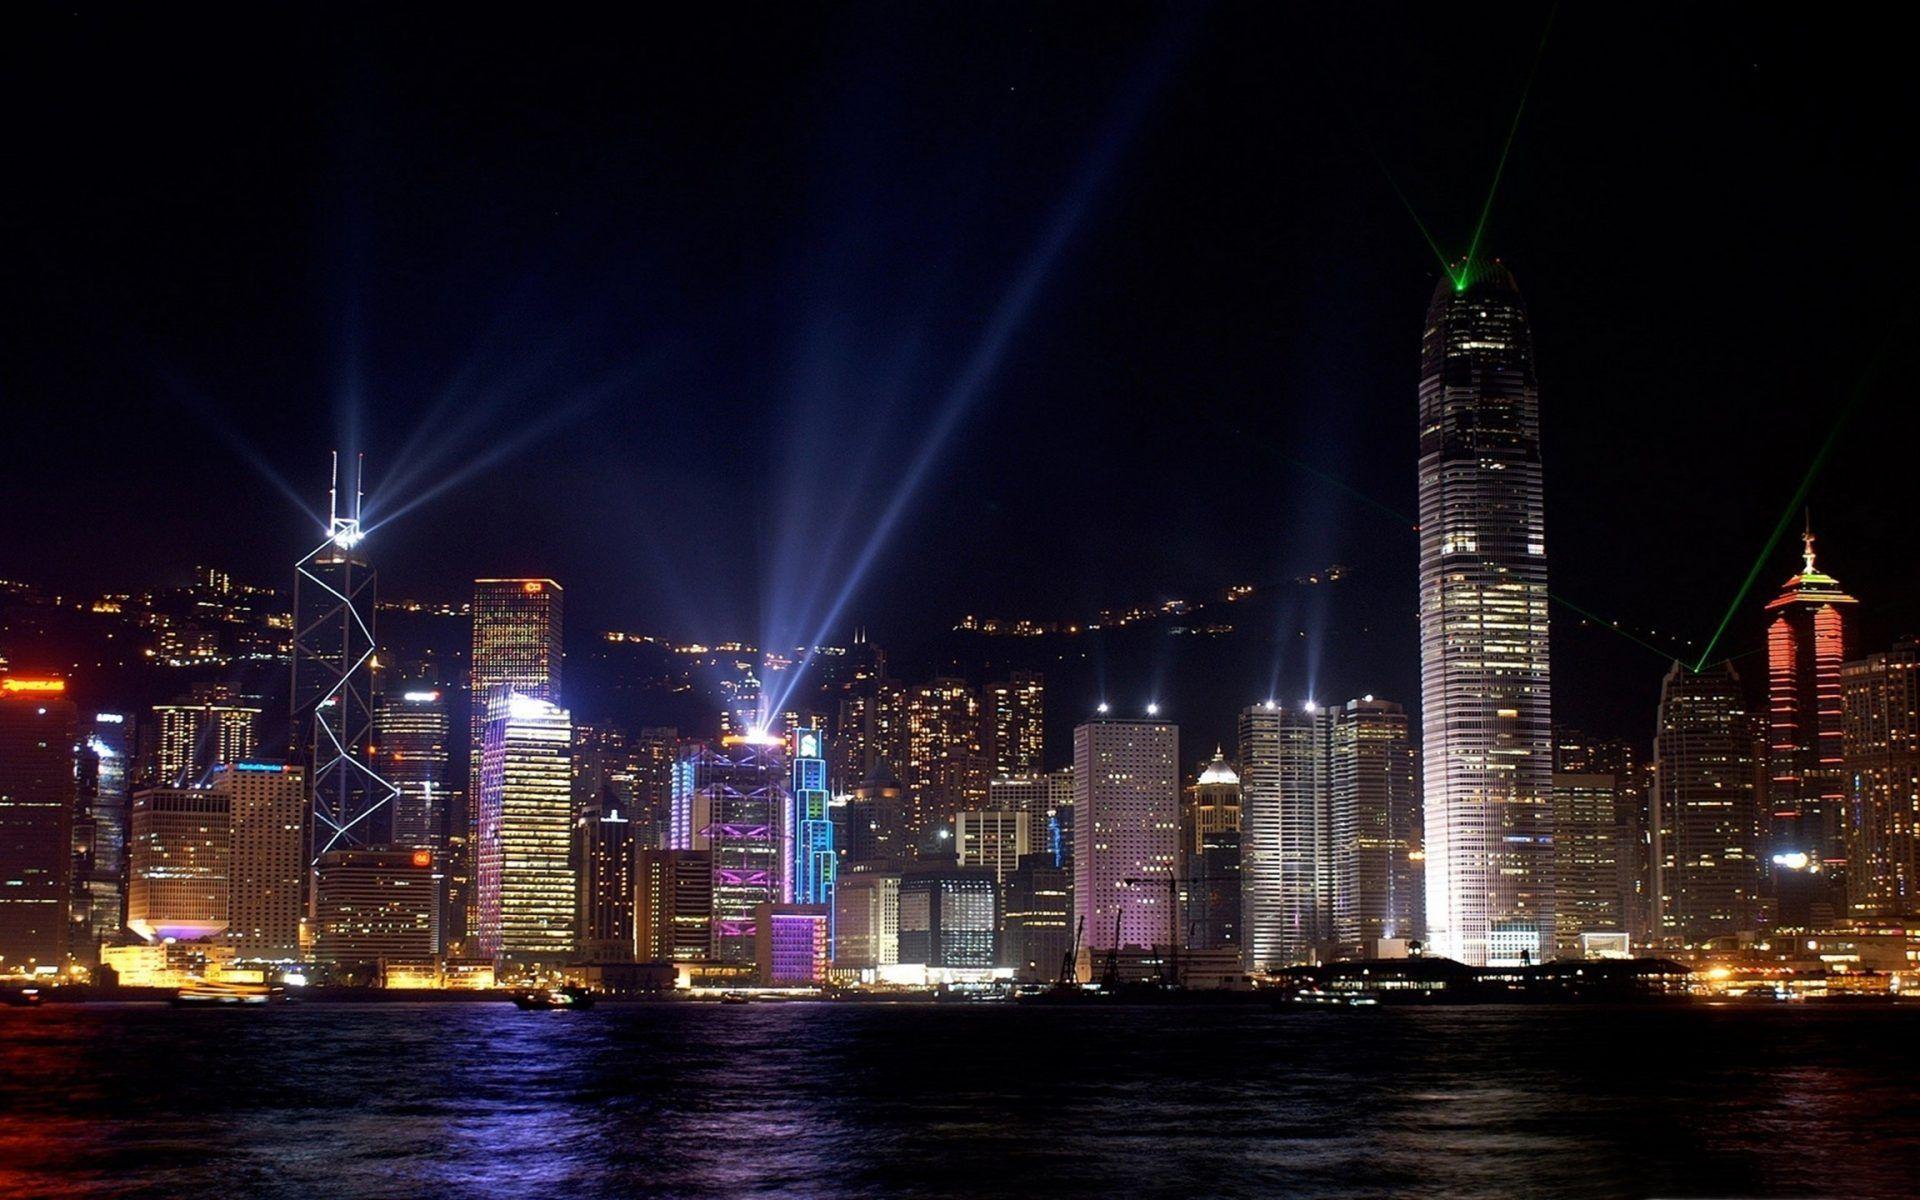 Hong Kong Victoria Harbour The City At Night Night Lighting Tall